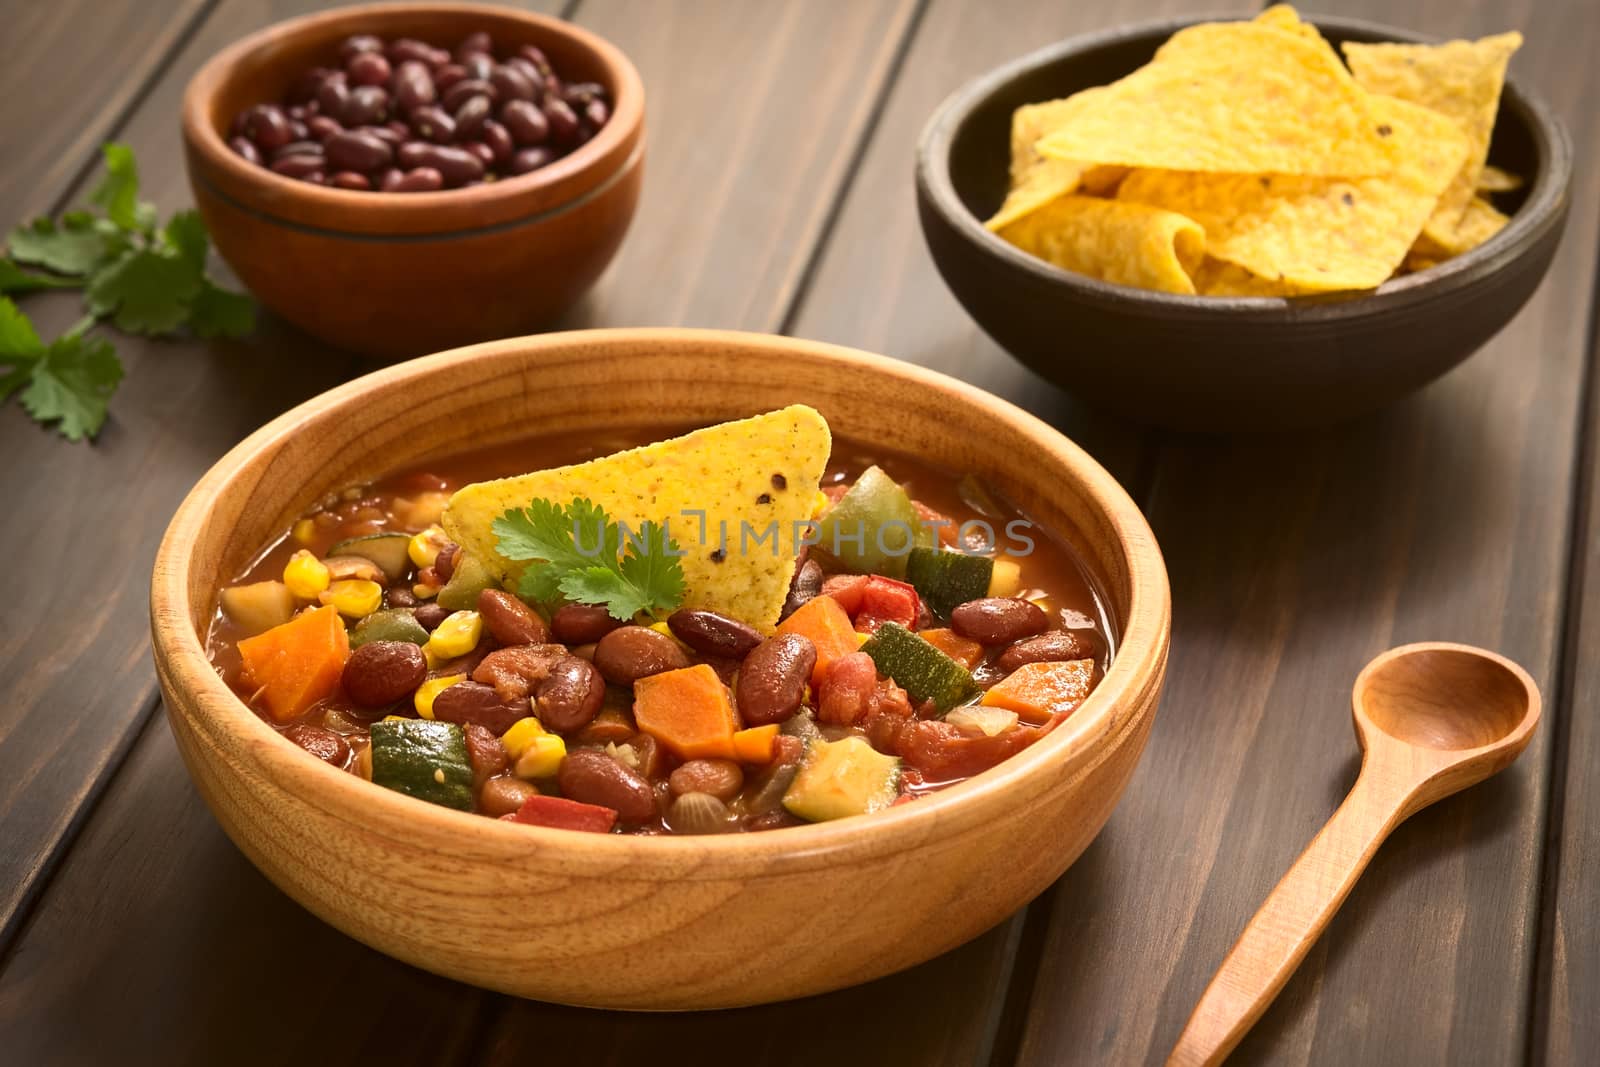 Wooden bowl of vegetarian chili dish made with kidney bean, carrot, zucchini, bell pepper, sweet corn, tomato, onion, garlic, garnished with tortilla chips and fresh coriander leaf, photographed with natural light (Selective Focus, Focus on the garnish)   